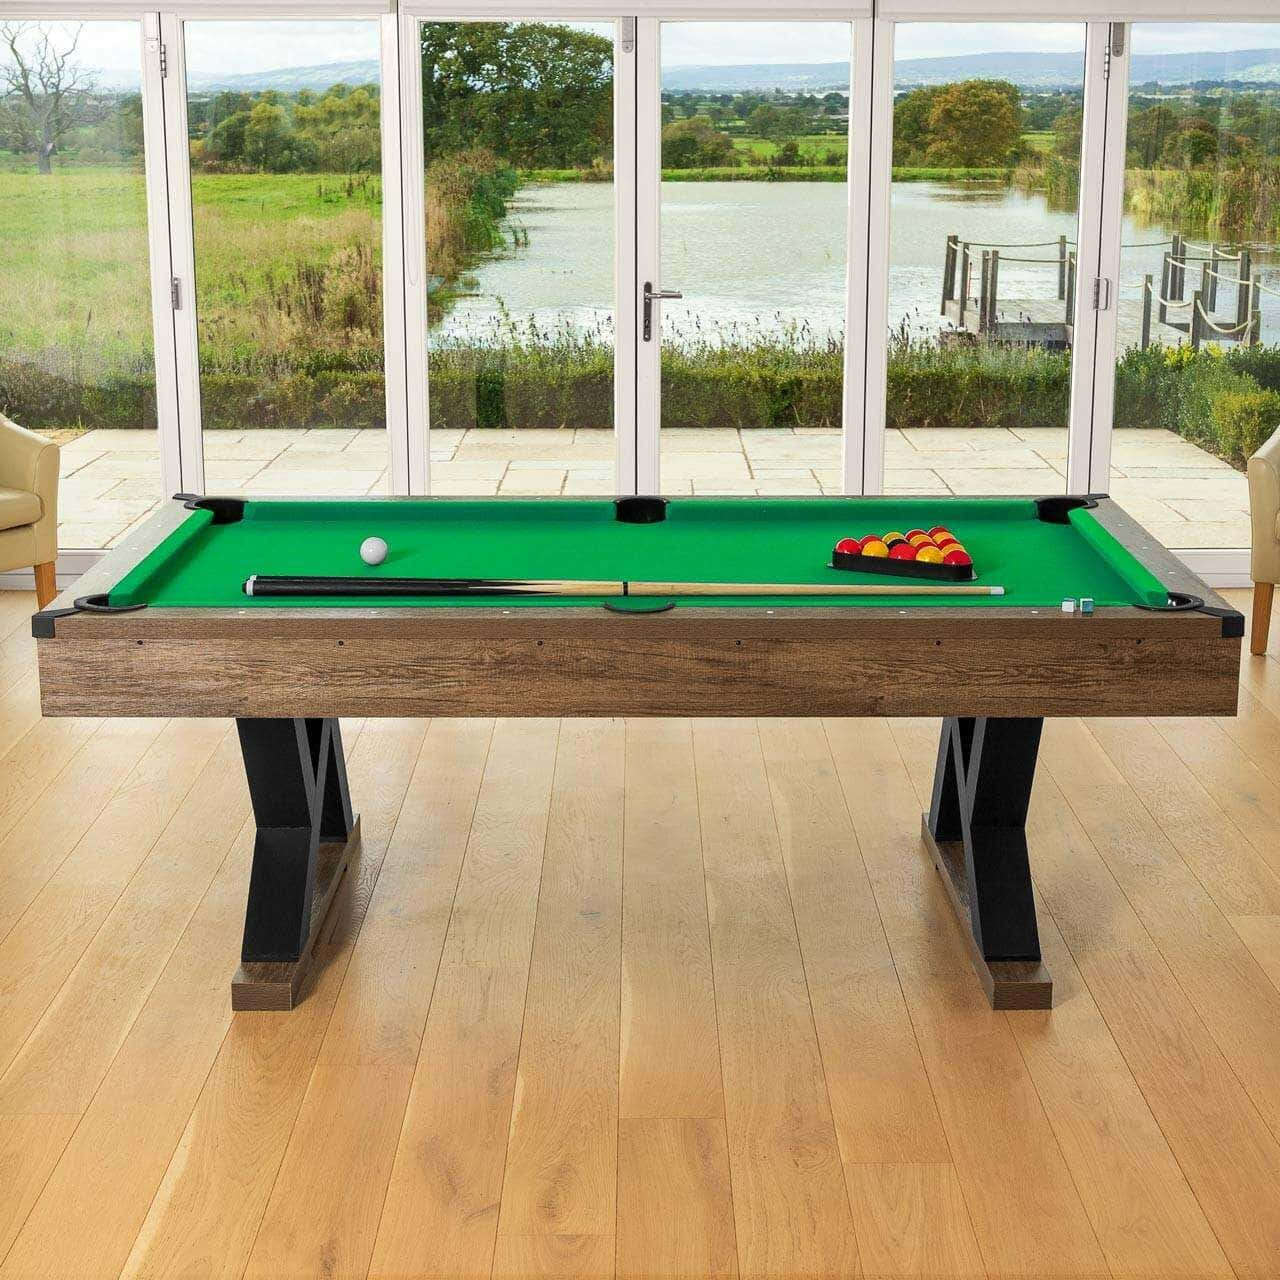 A Pool Table In A Room With A View